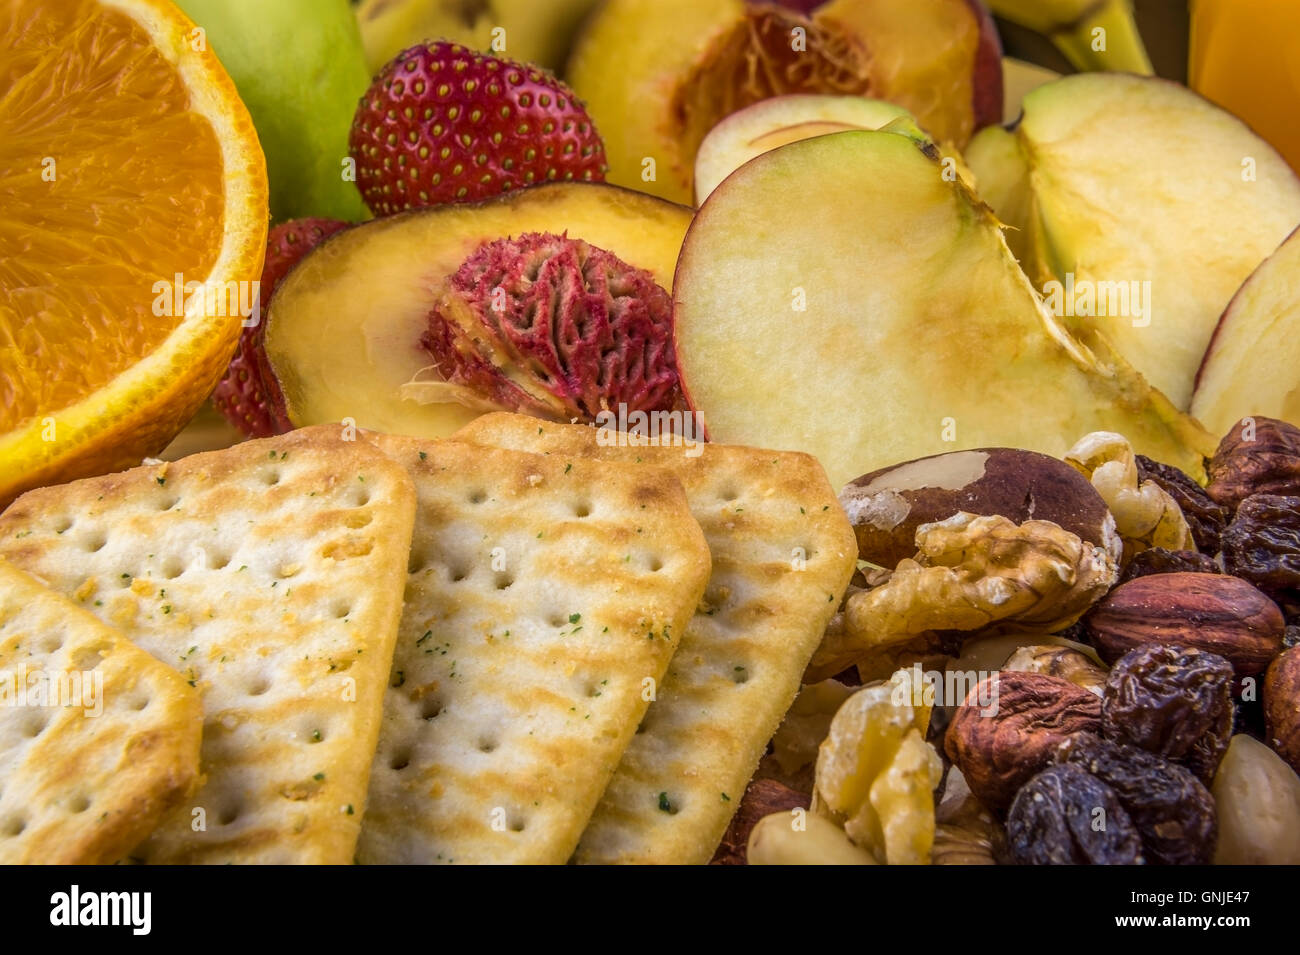 Snacks background fruits nuts crackers Stock Photo